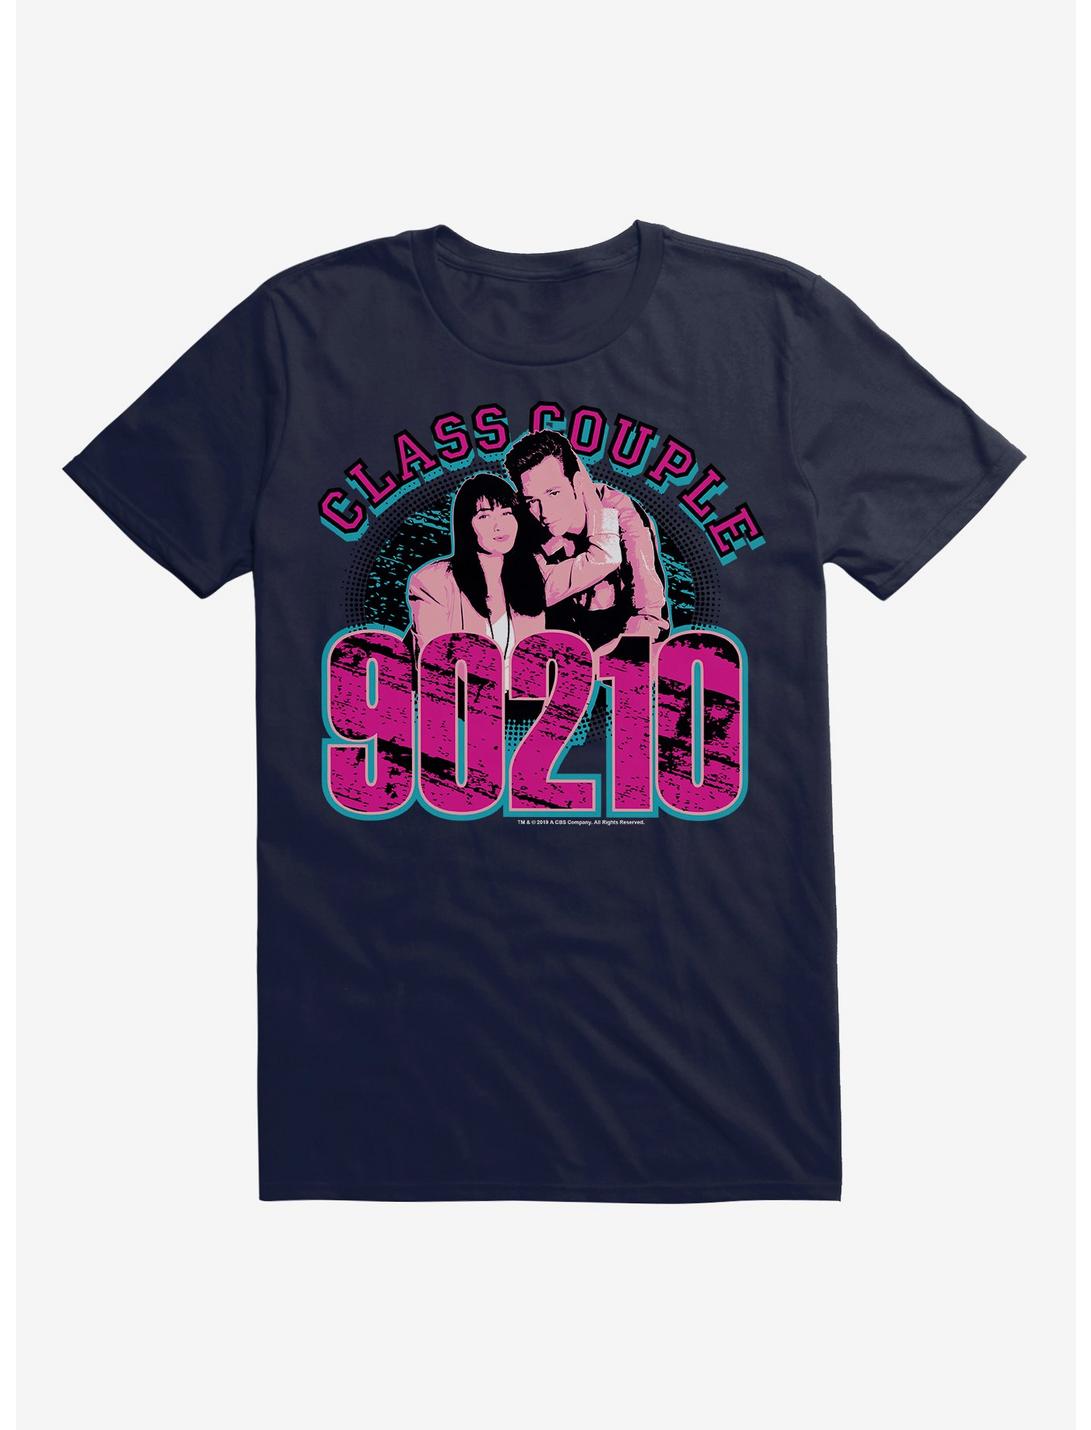 Beverly Hills 90210 Class Couple Dylan and Brenda T-Shirt, NAVY, hi-res